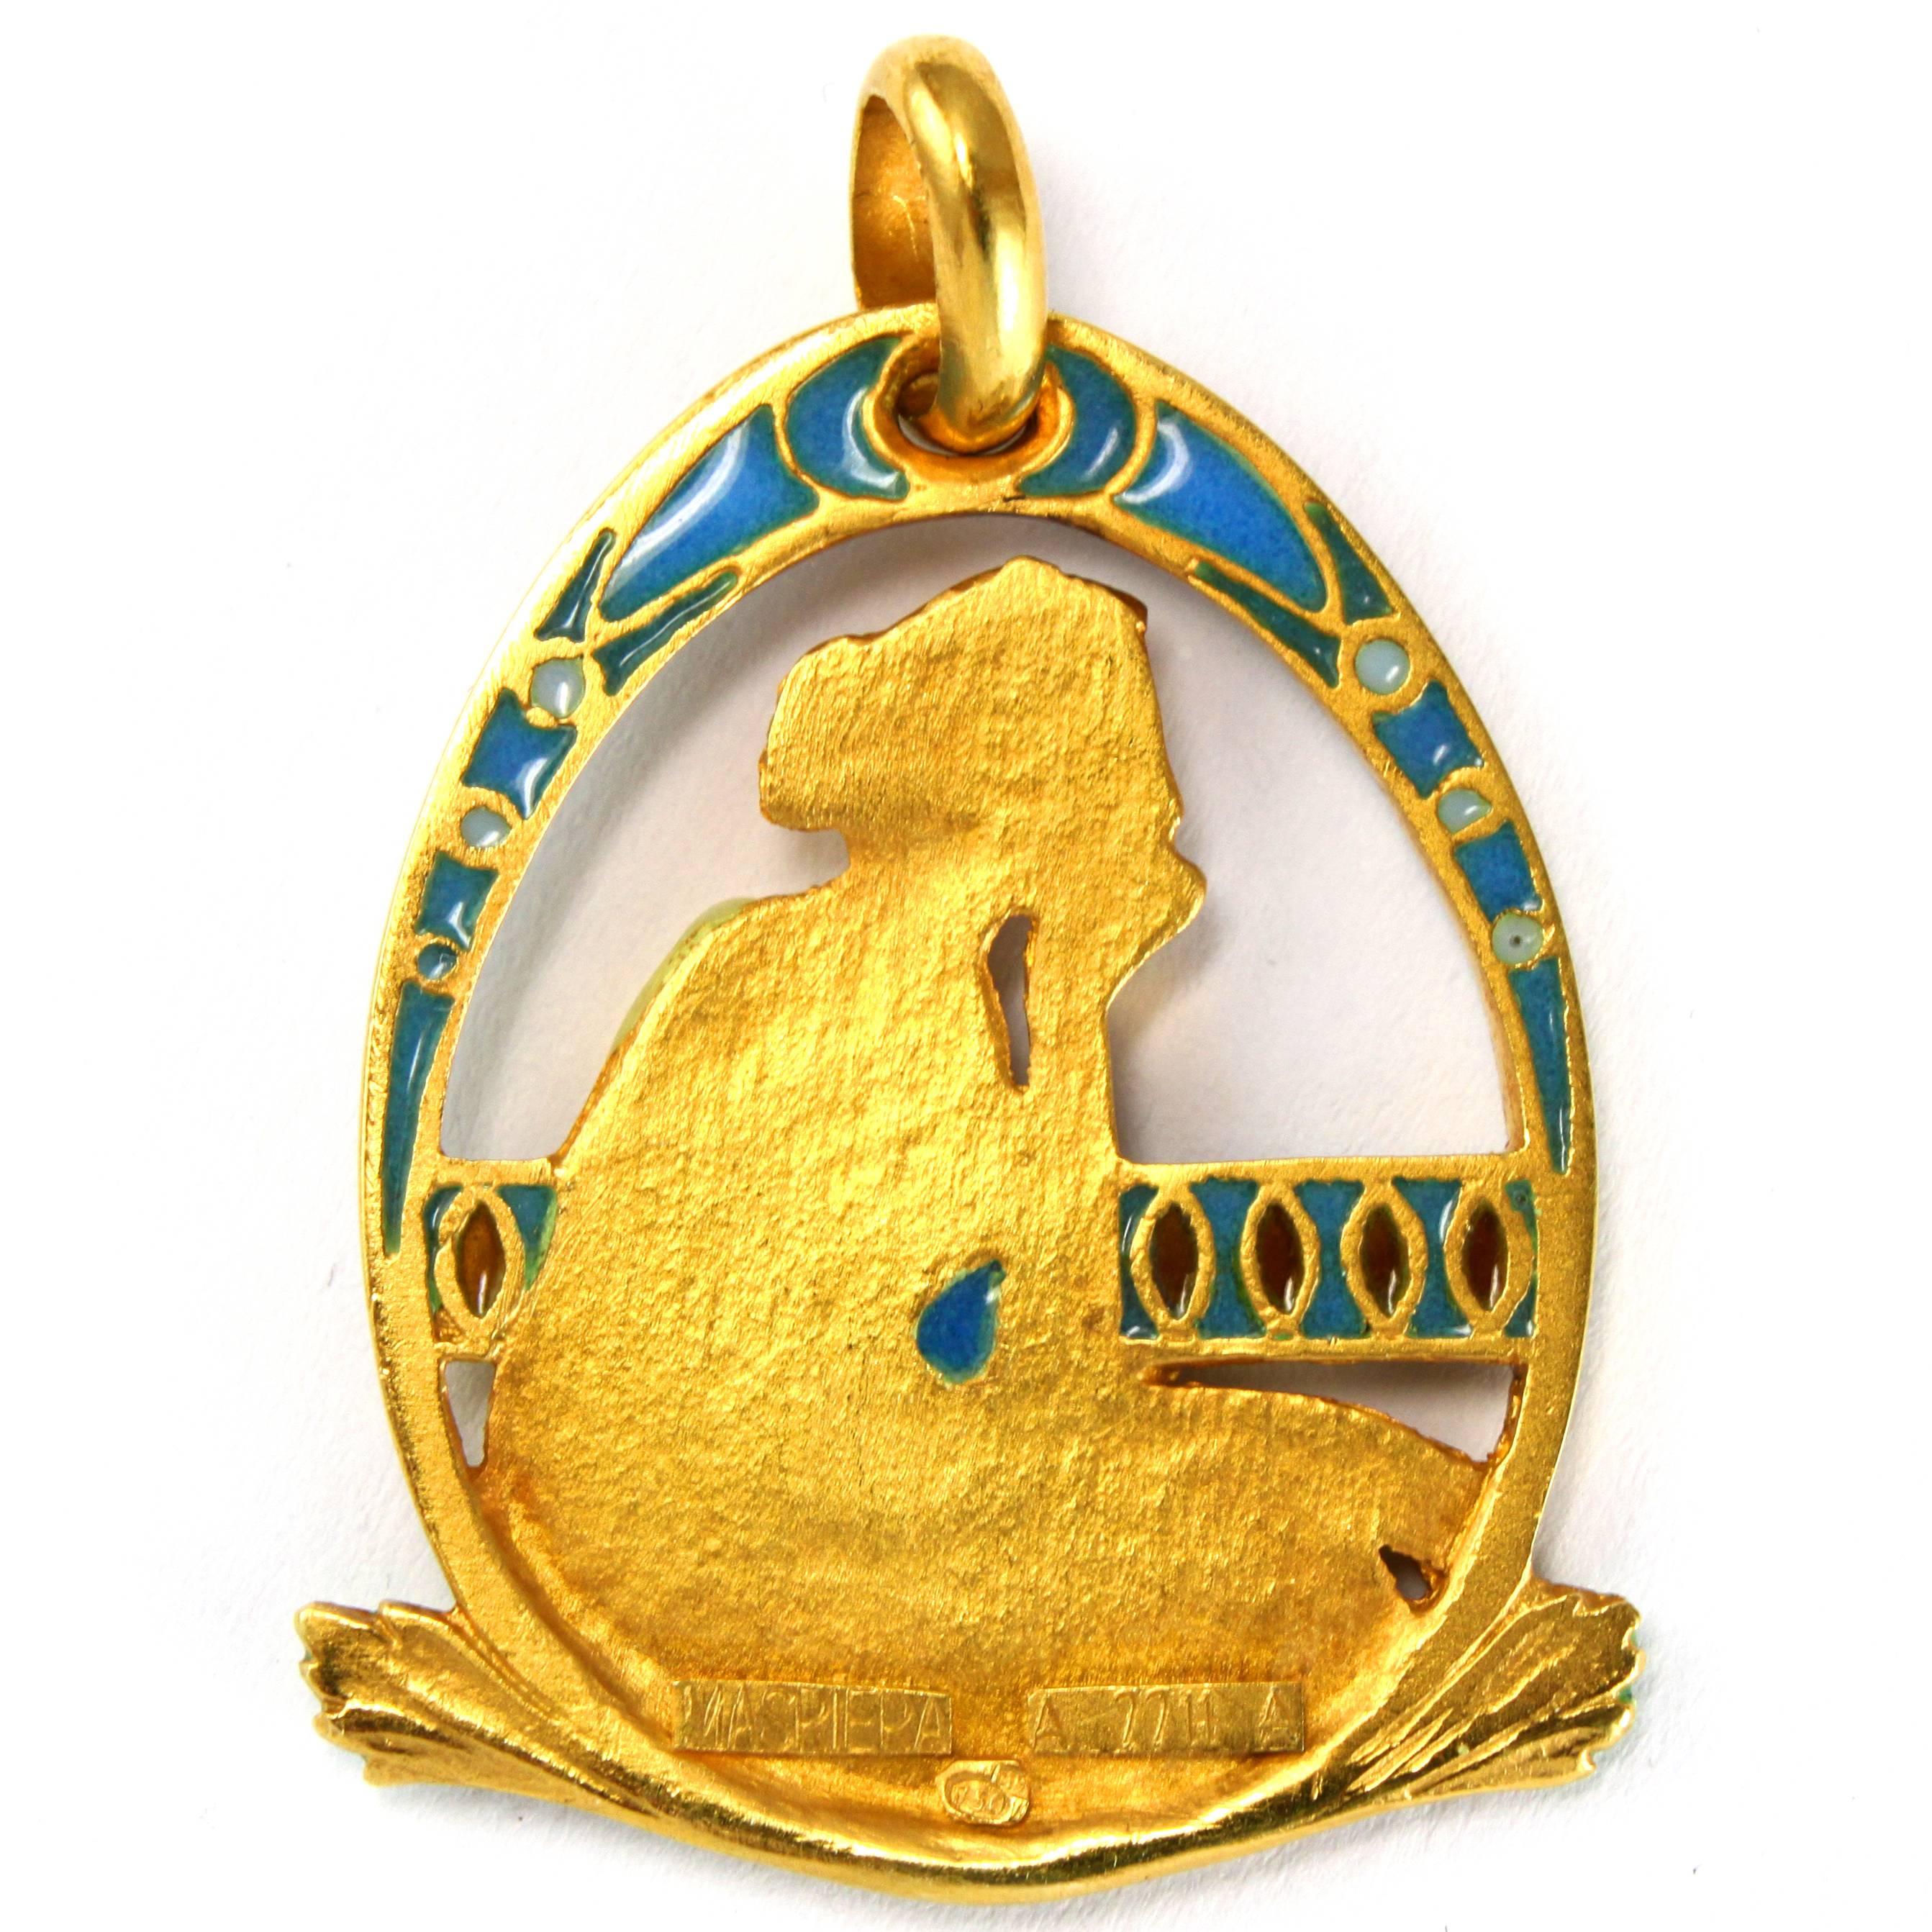 A Plique a Jour Enamel Pendant by Masriera

Depicting a thoughtful sitting maiden with beautiful window-enamelling, famous for the Art Nouveau Masriera pieces.